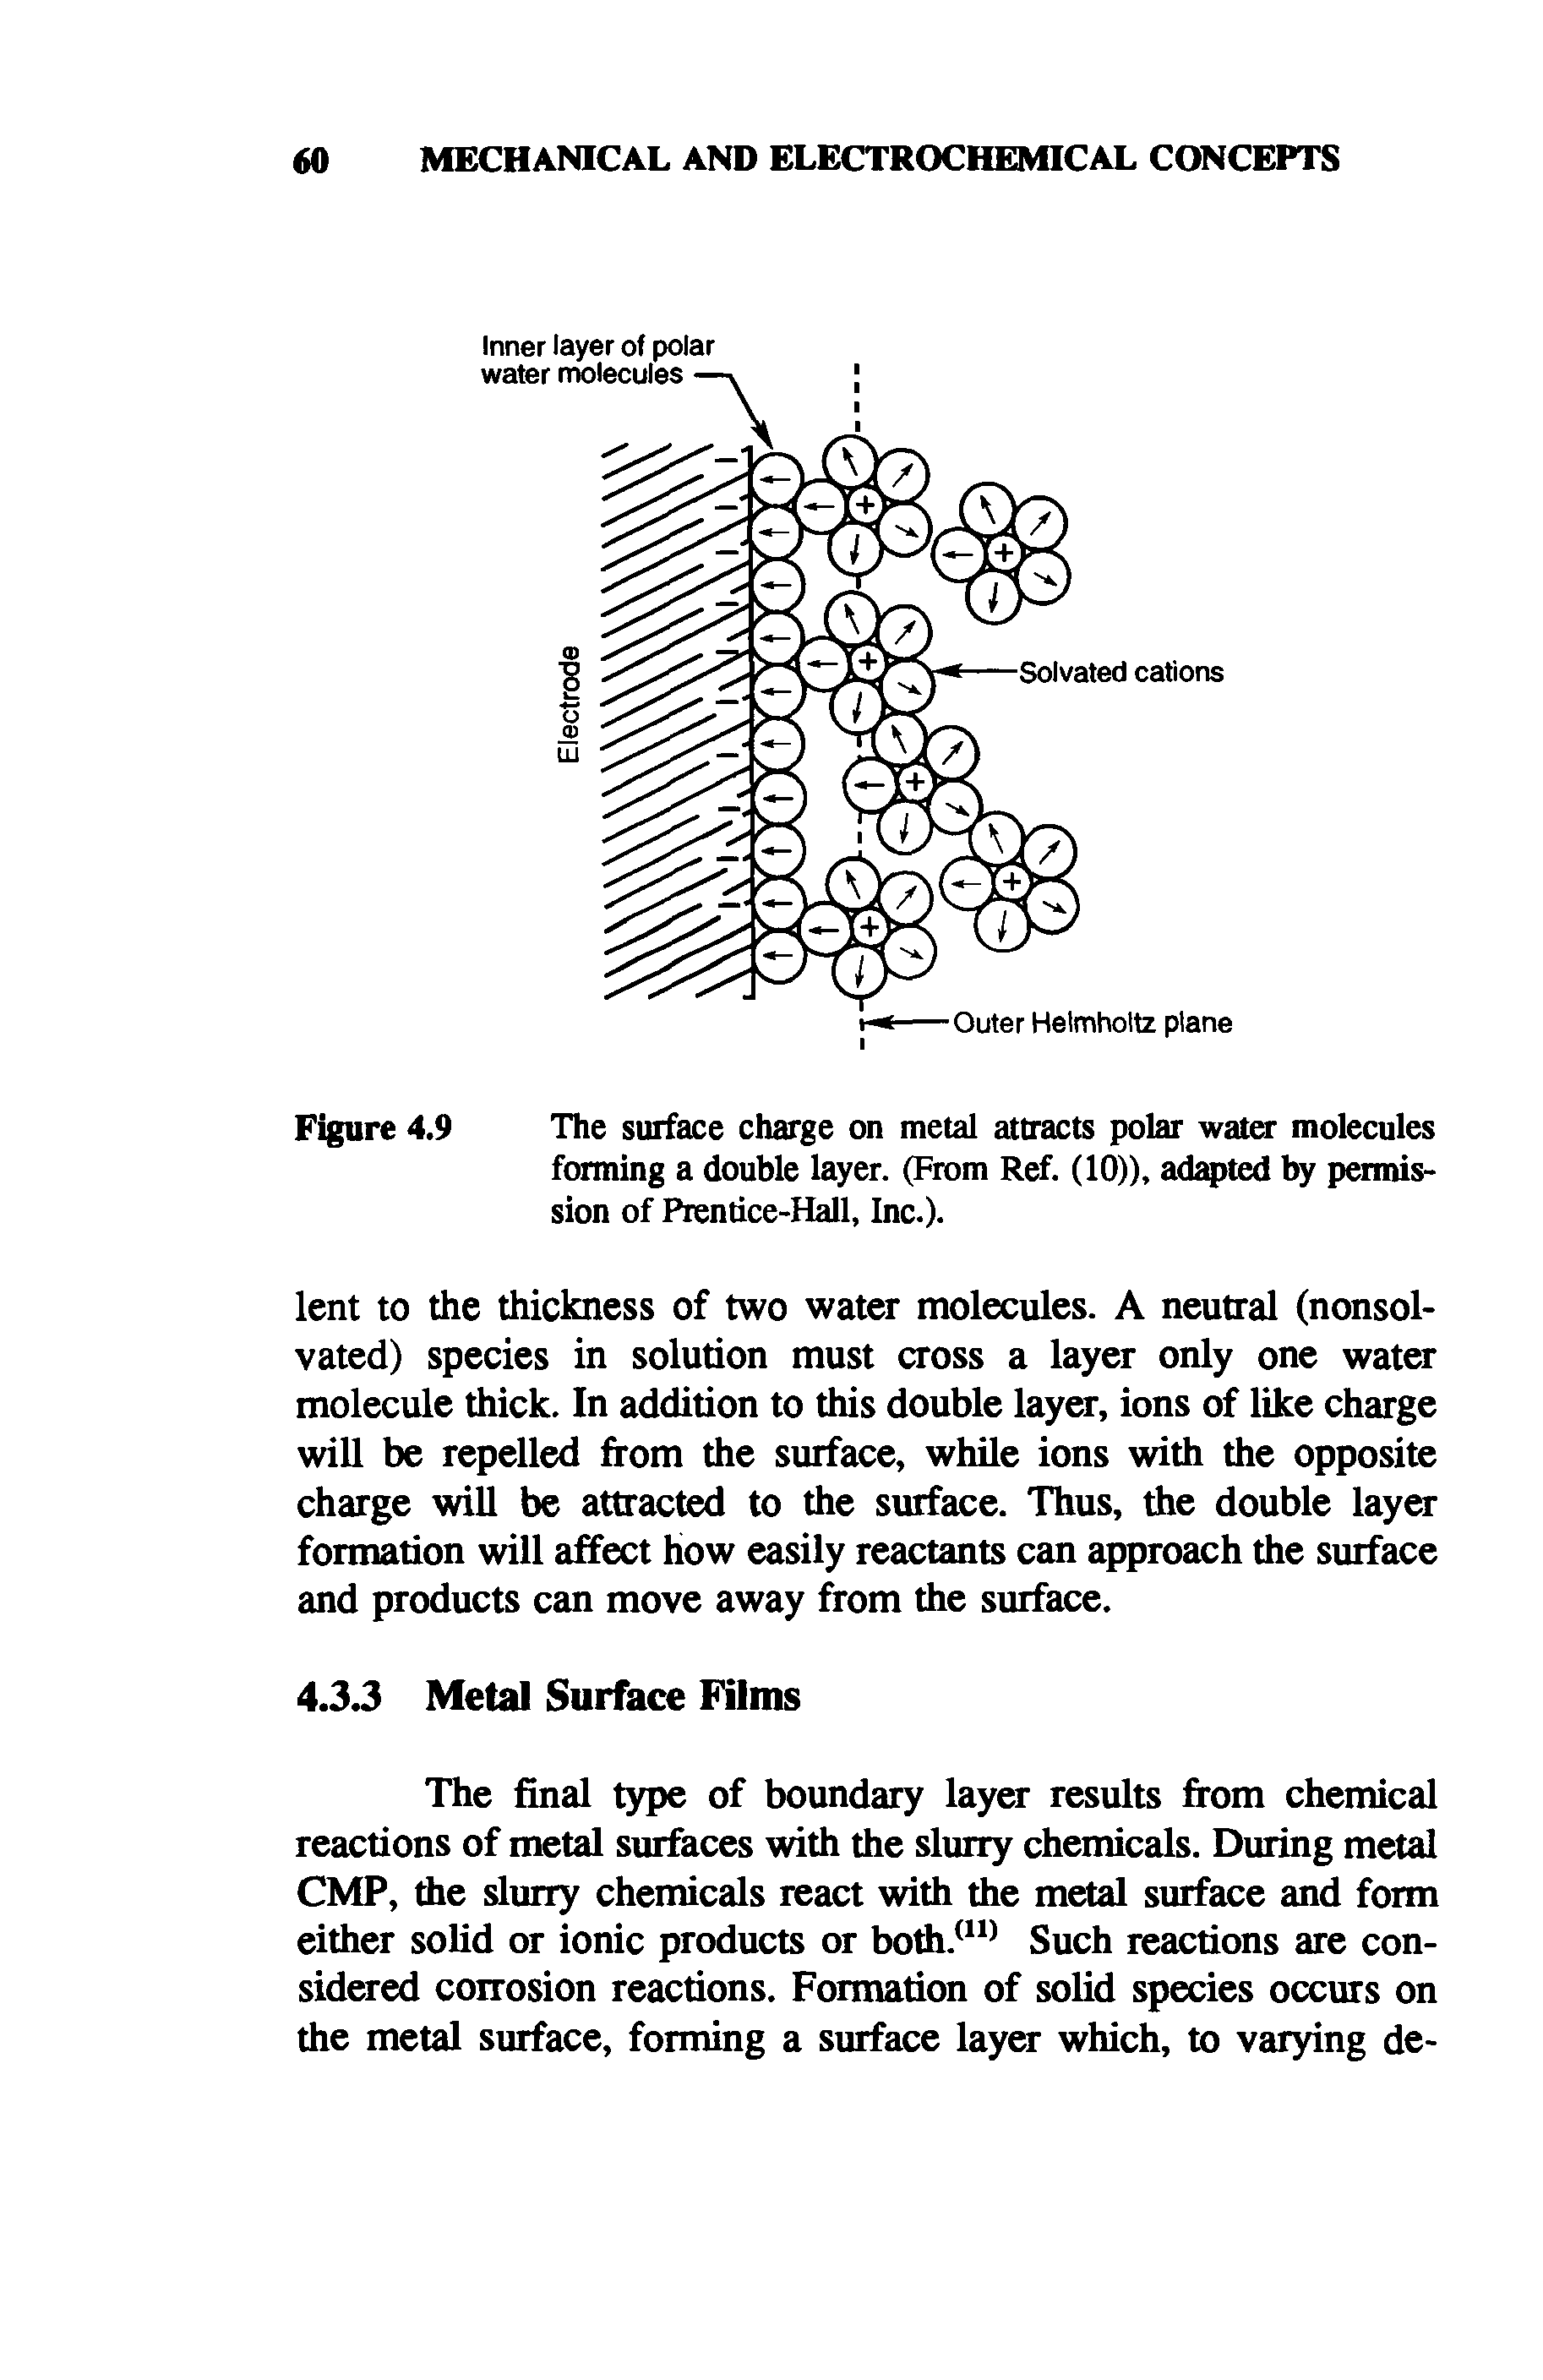 Figure 4.9 The surface charge on metal attracts polar water molecules forming a double layer. (From Ref. (10)), adtq>ted by permission of Prentice-Hall, Inc.).